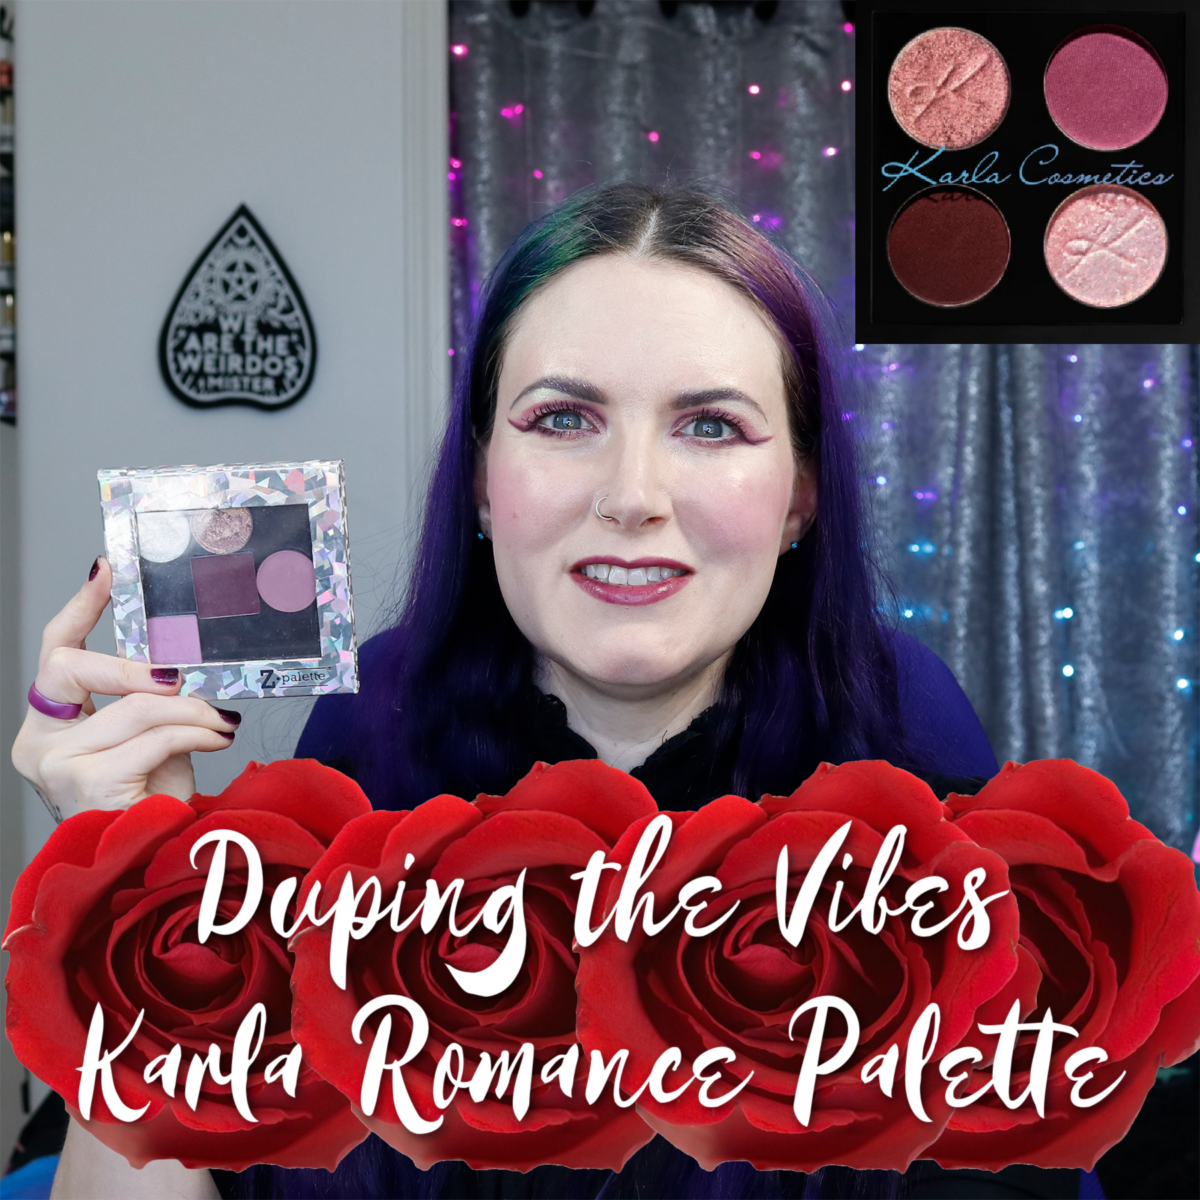 Duping the Karla Romance Palette